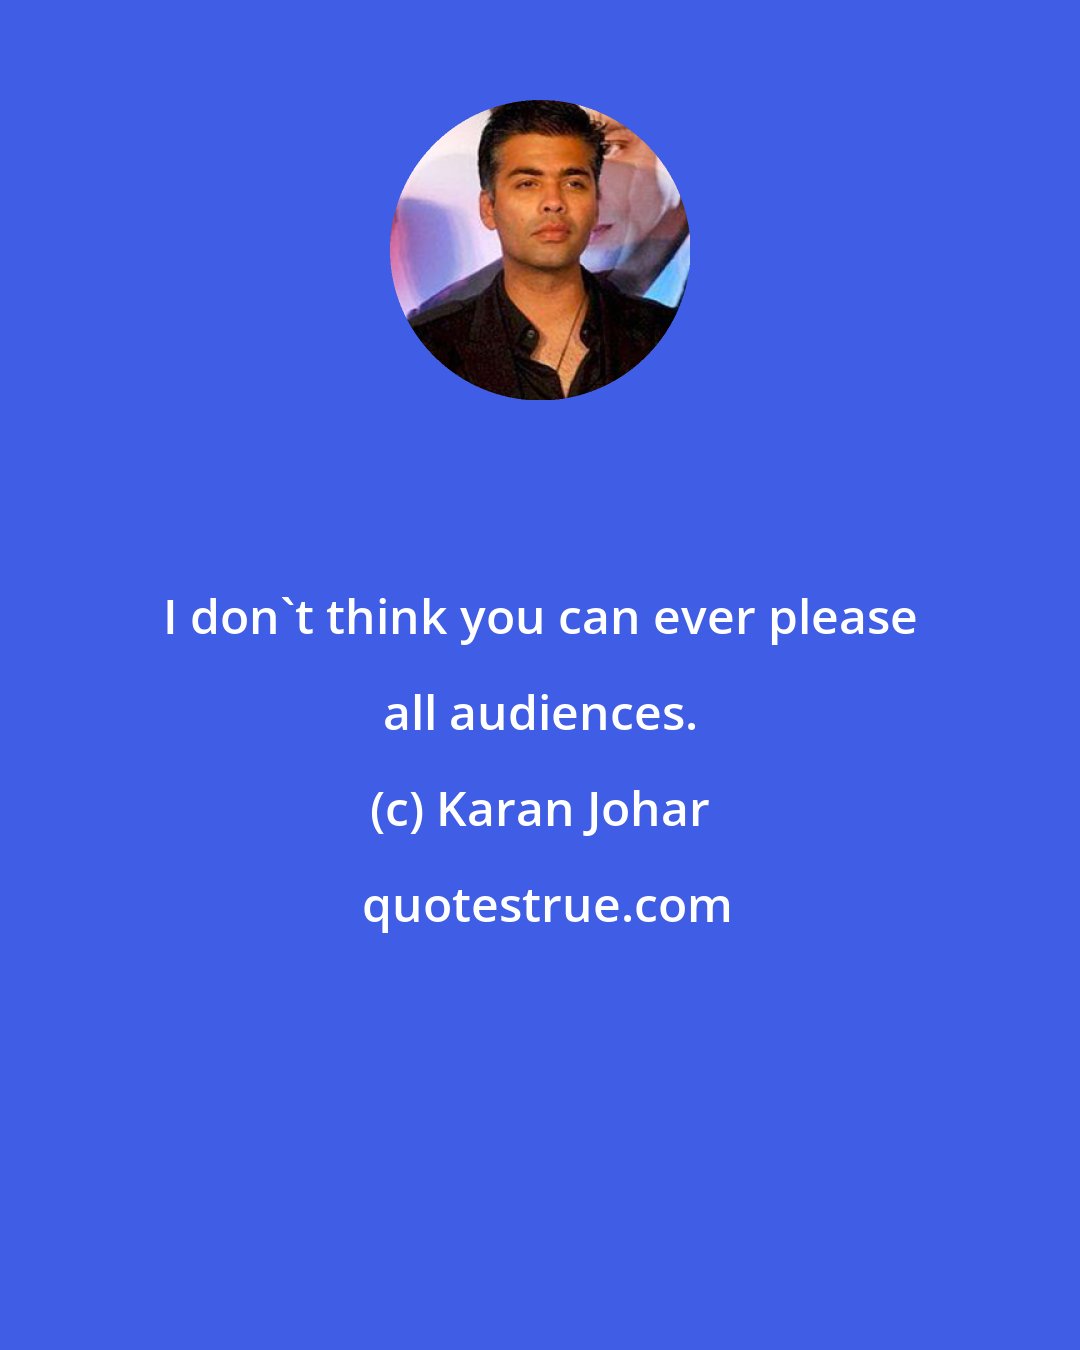 Karan Johar: I don't think you can ever please all audiences.